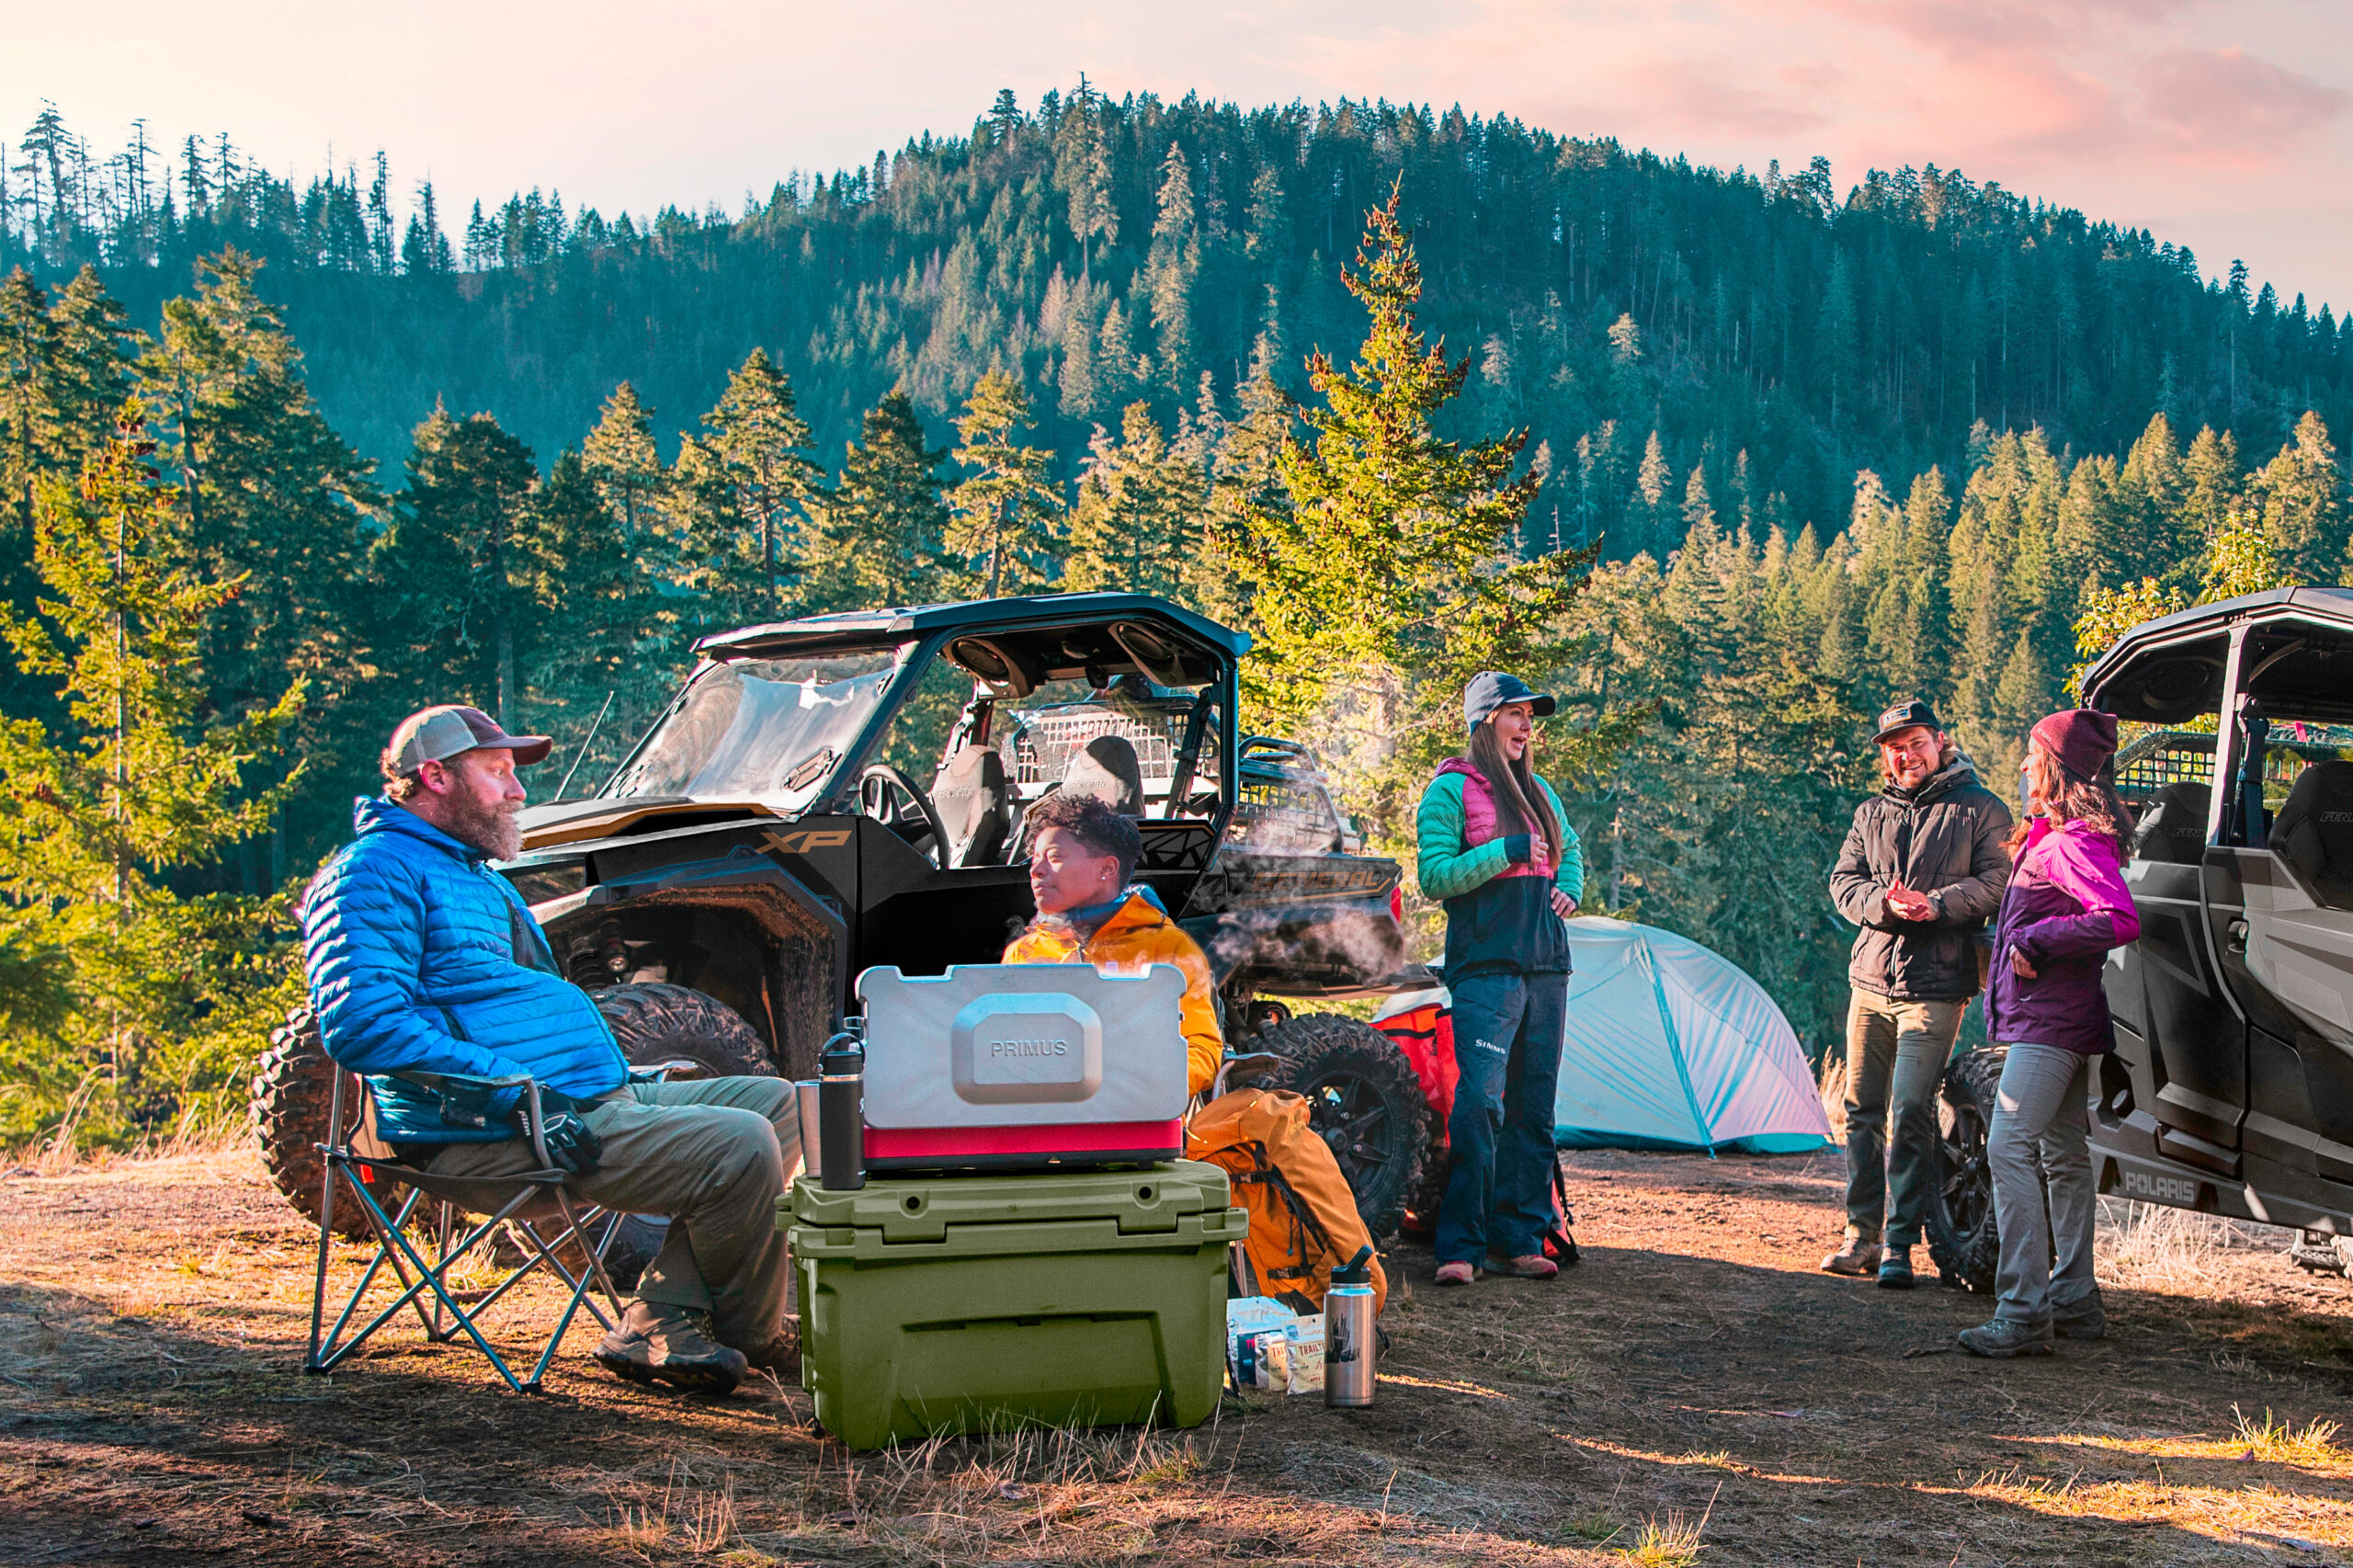 Save 20% on Polaris Coolers for Memorial Day